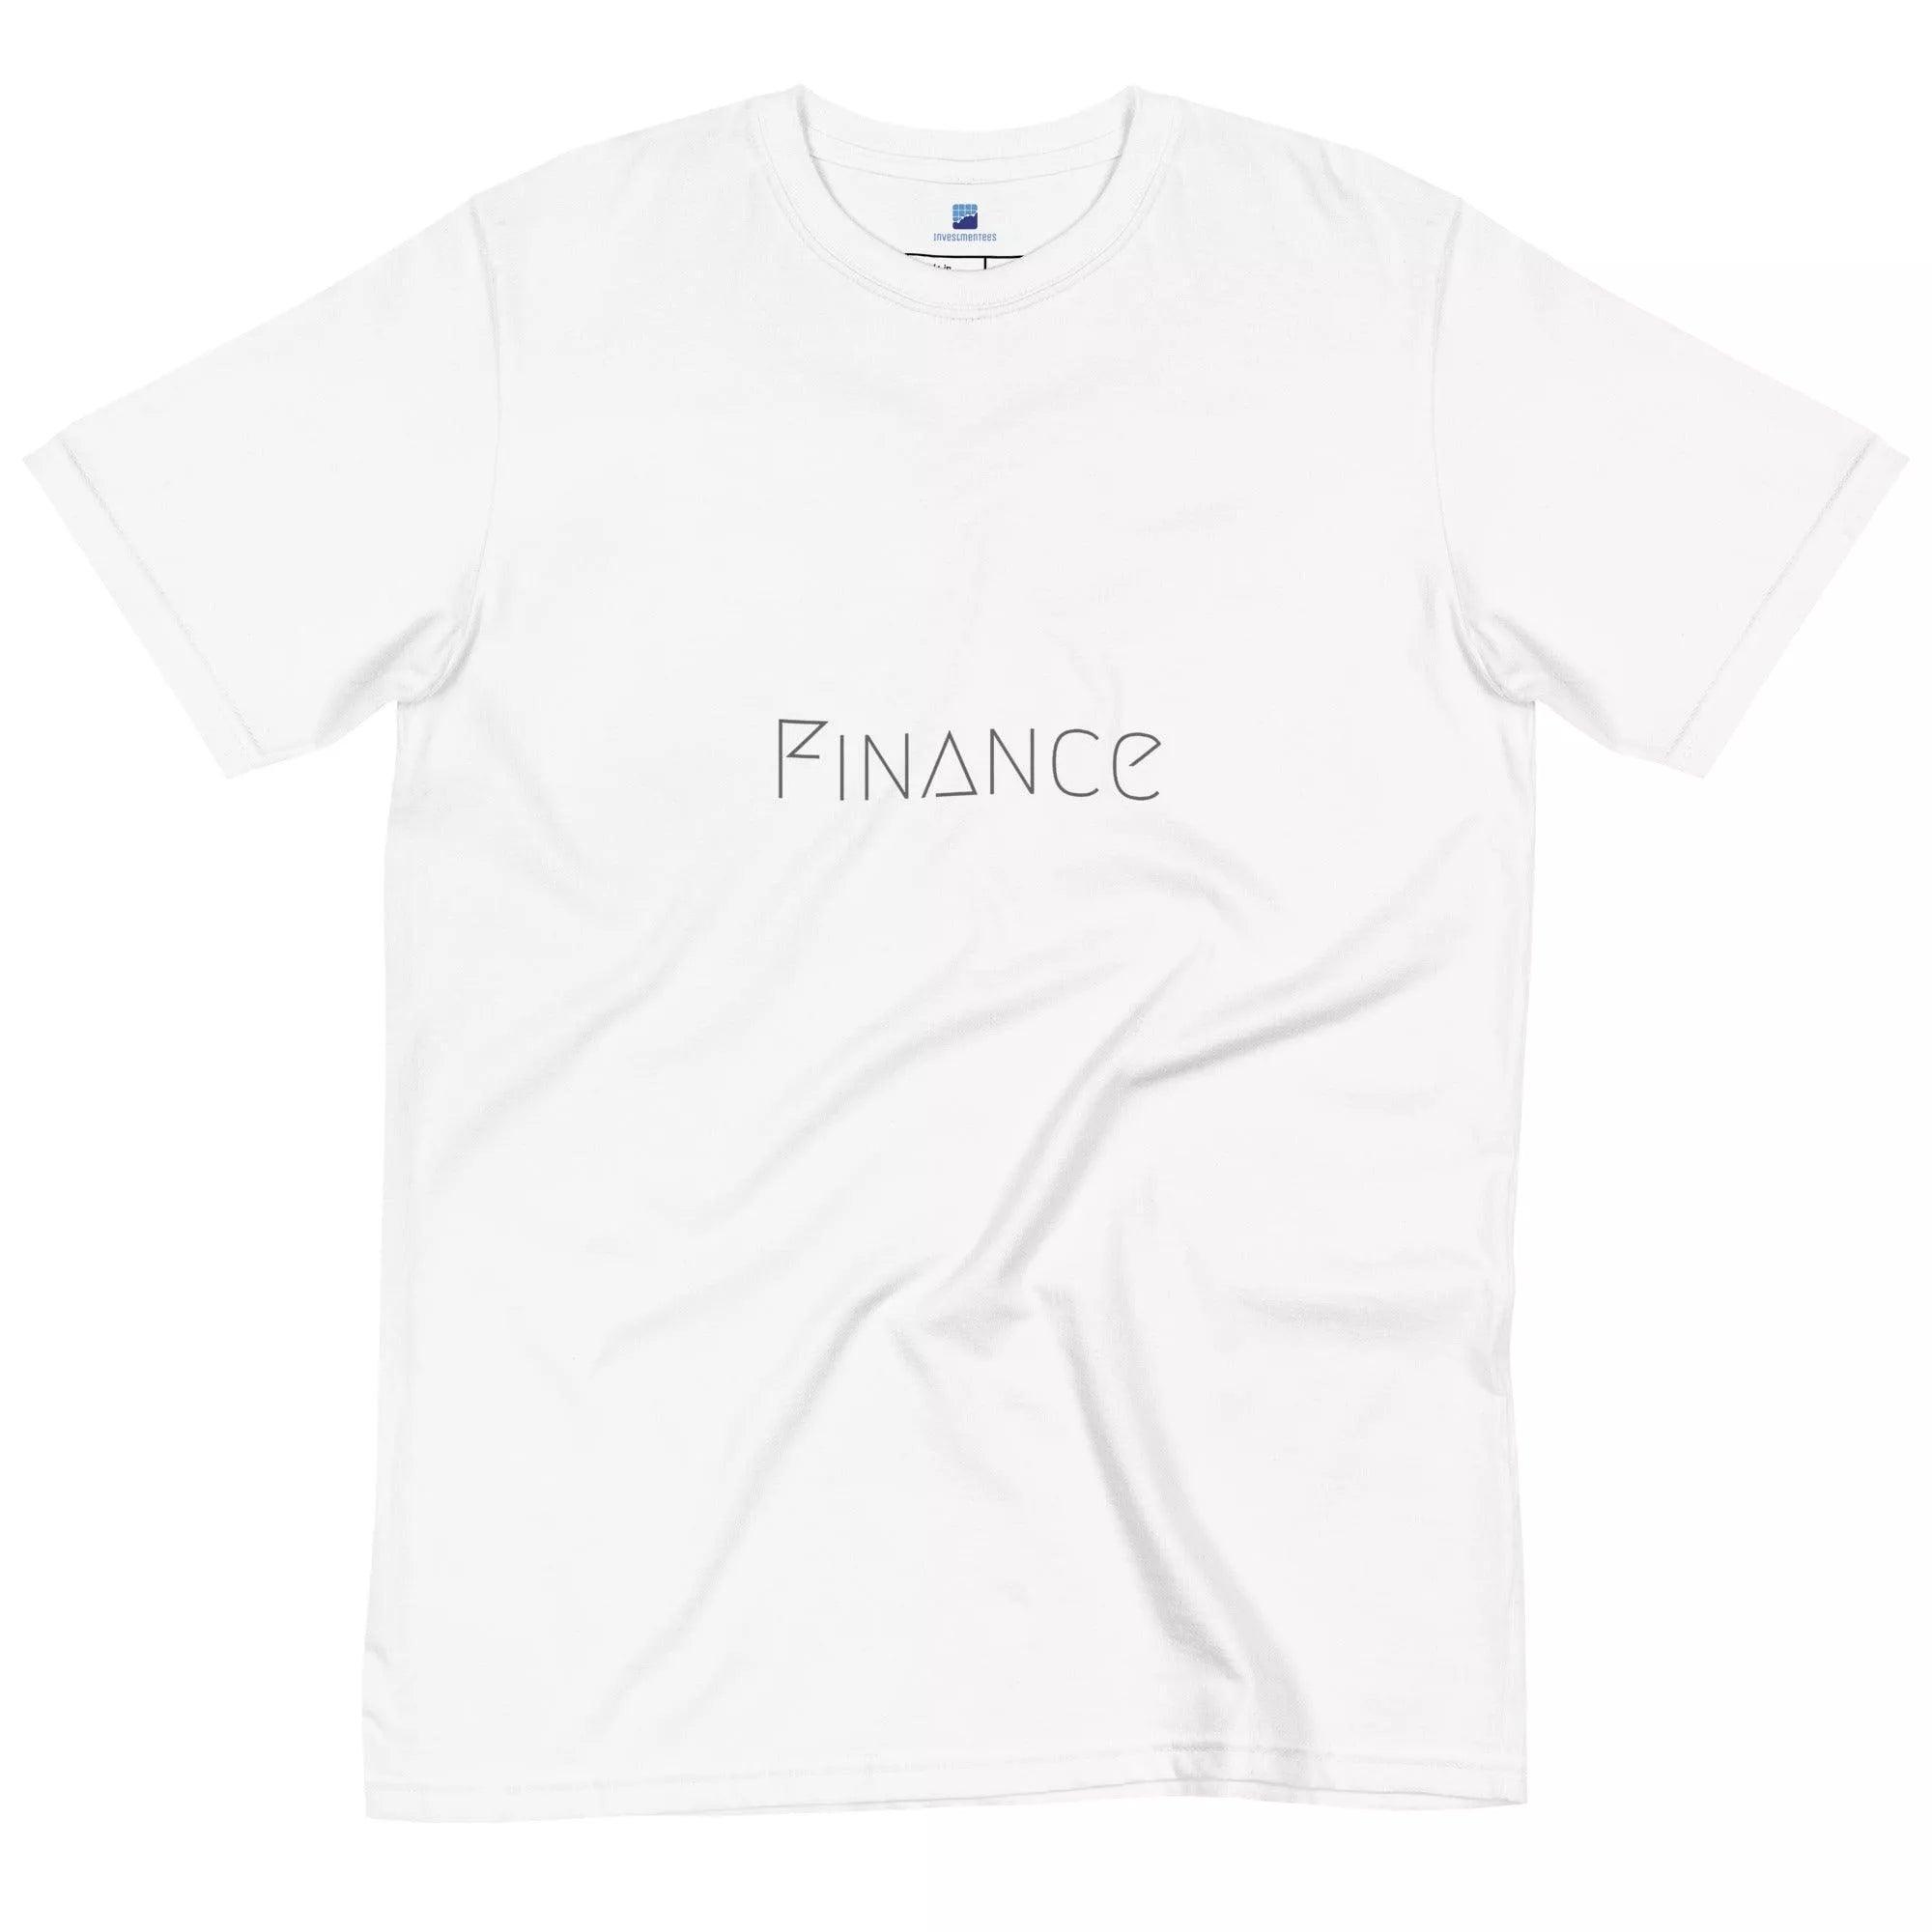 The Wise Investor | Finance T-Shirt - InvestmenTees